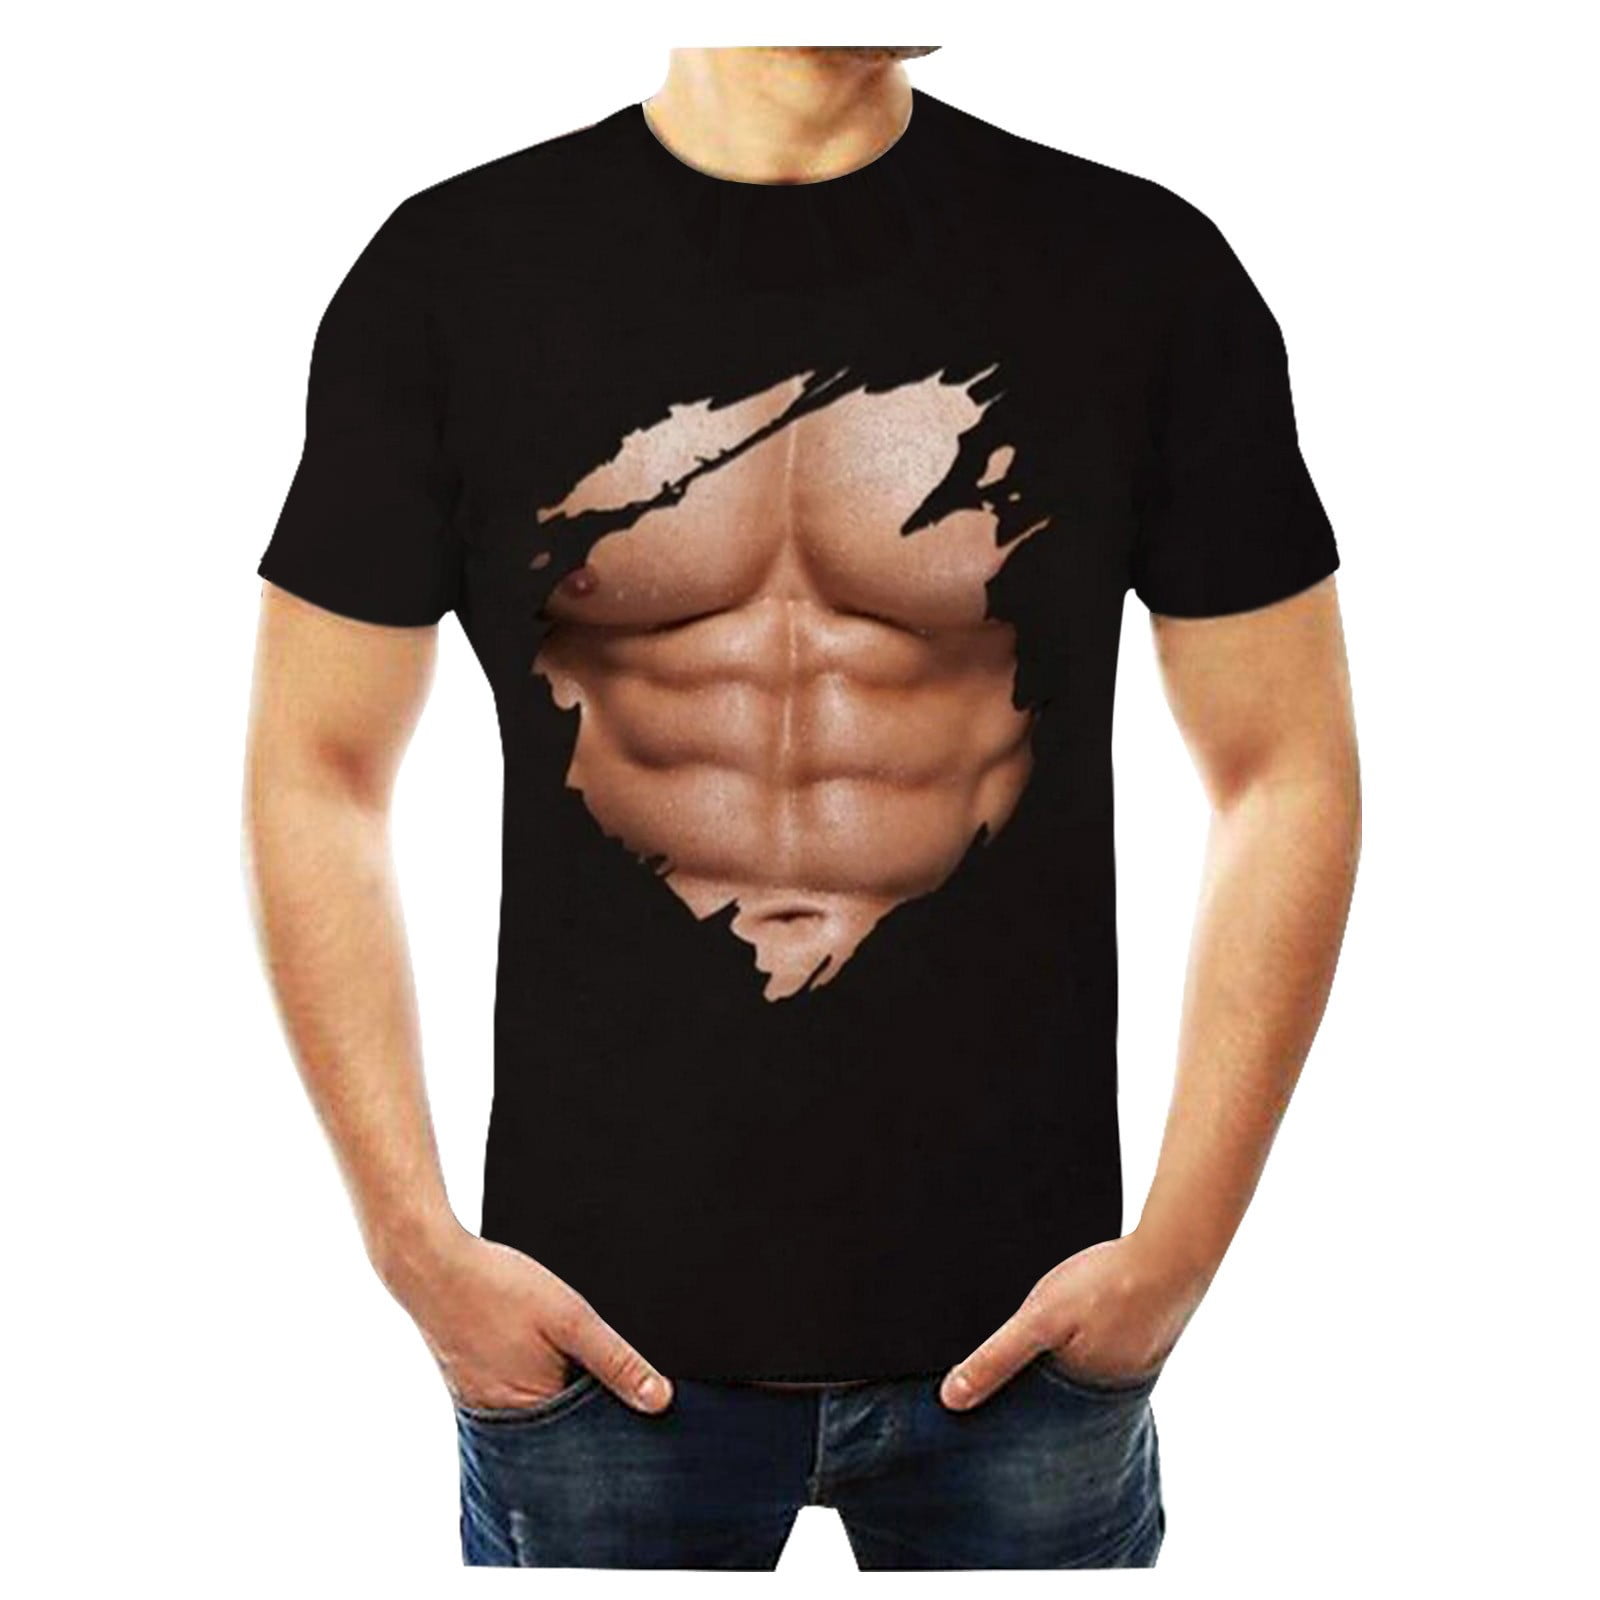  Funny Fake Six Pack Abs T-Shirt Big Muscle Chest